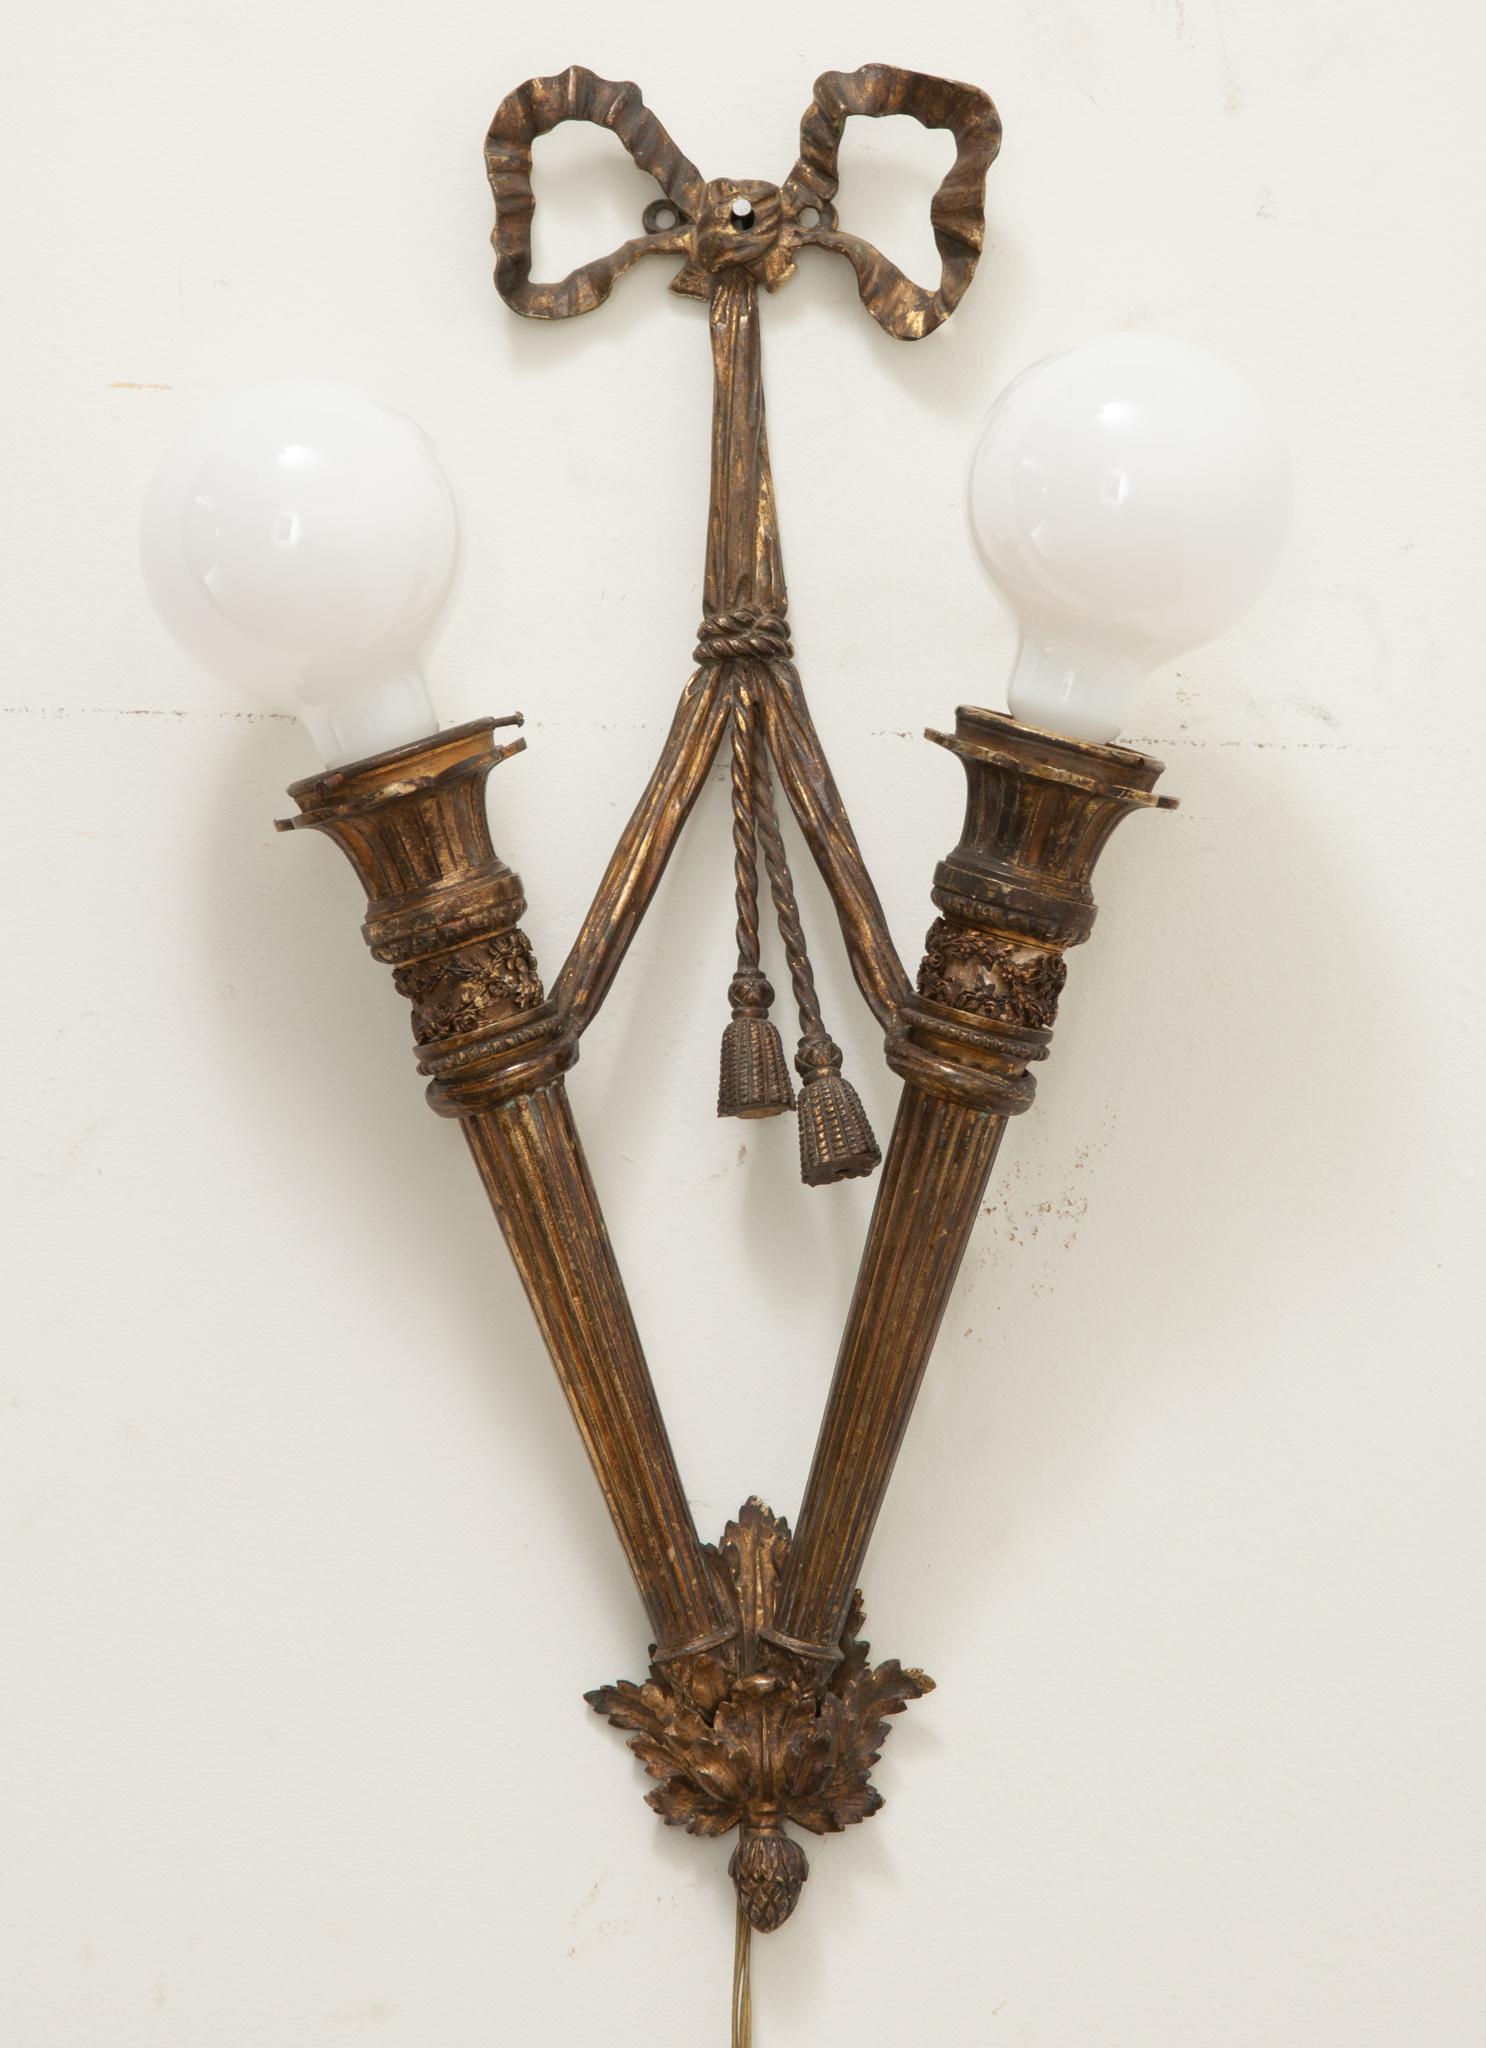 A French Louis XVI style two bulb single sconce. This classically designed bronze sconce depicts a bow twisted around two fluted column forms ending with a laurel leaf pendant. Professionally rewired for the US using UL listed parts and ready to be